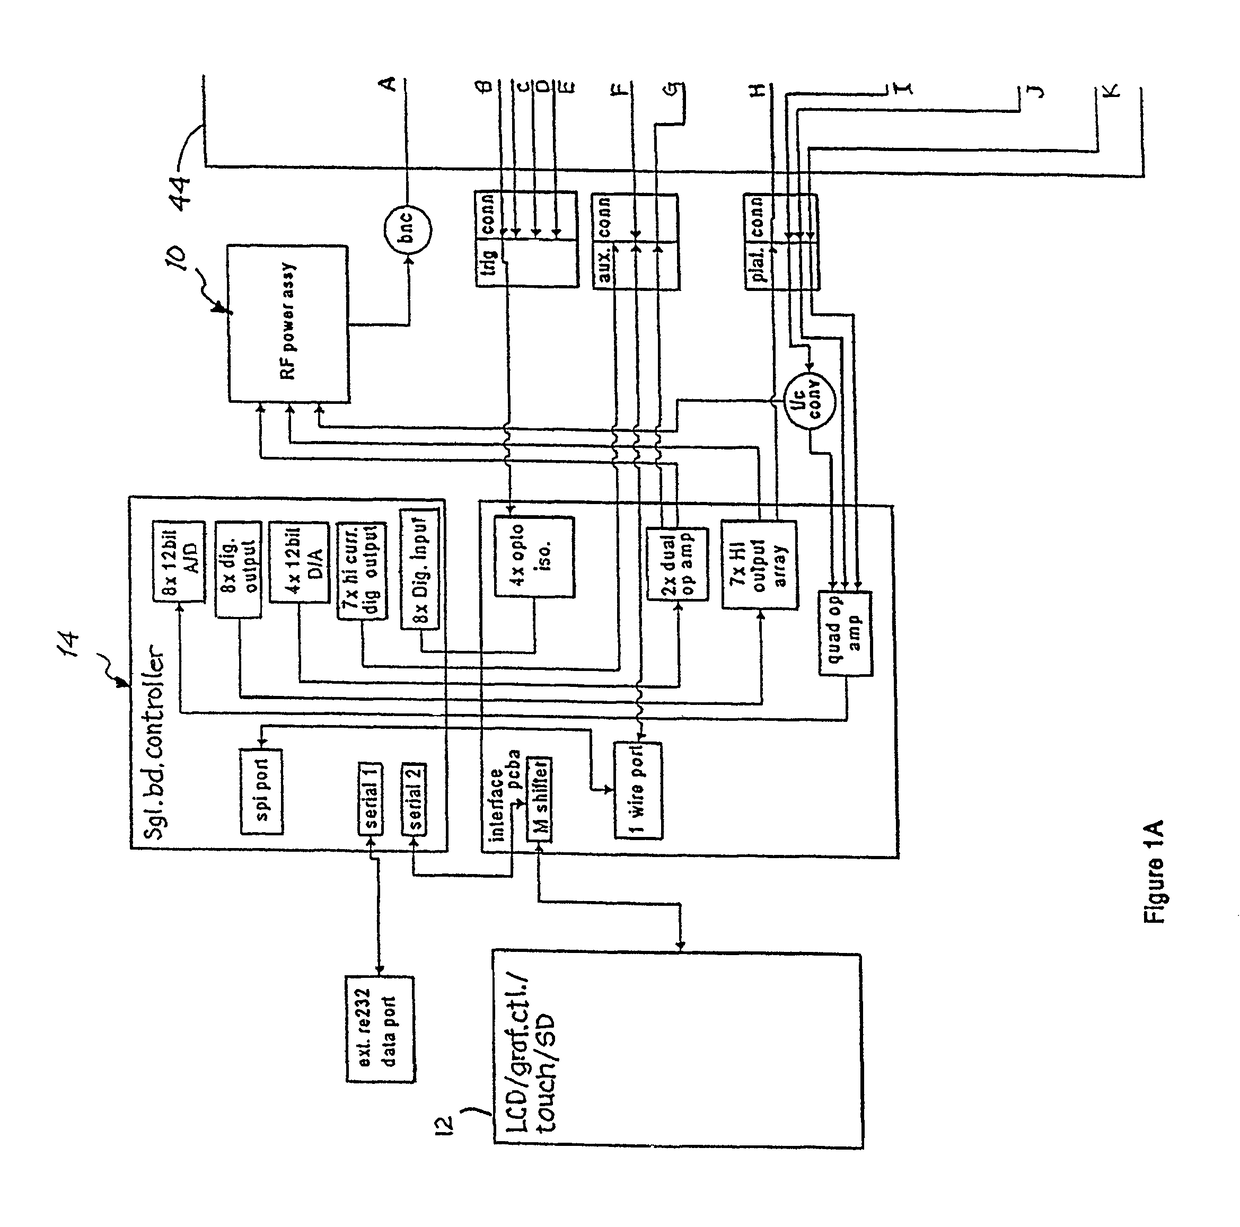 RF generator with multiplexed programmed molds